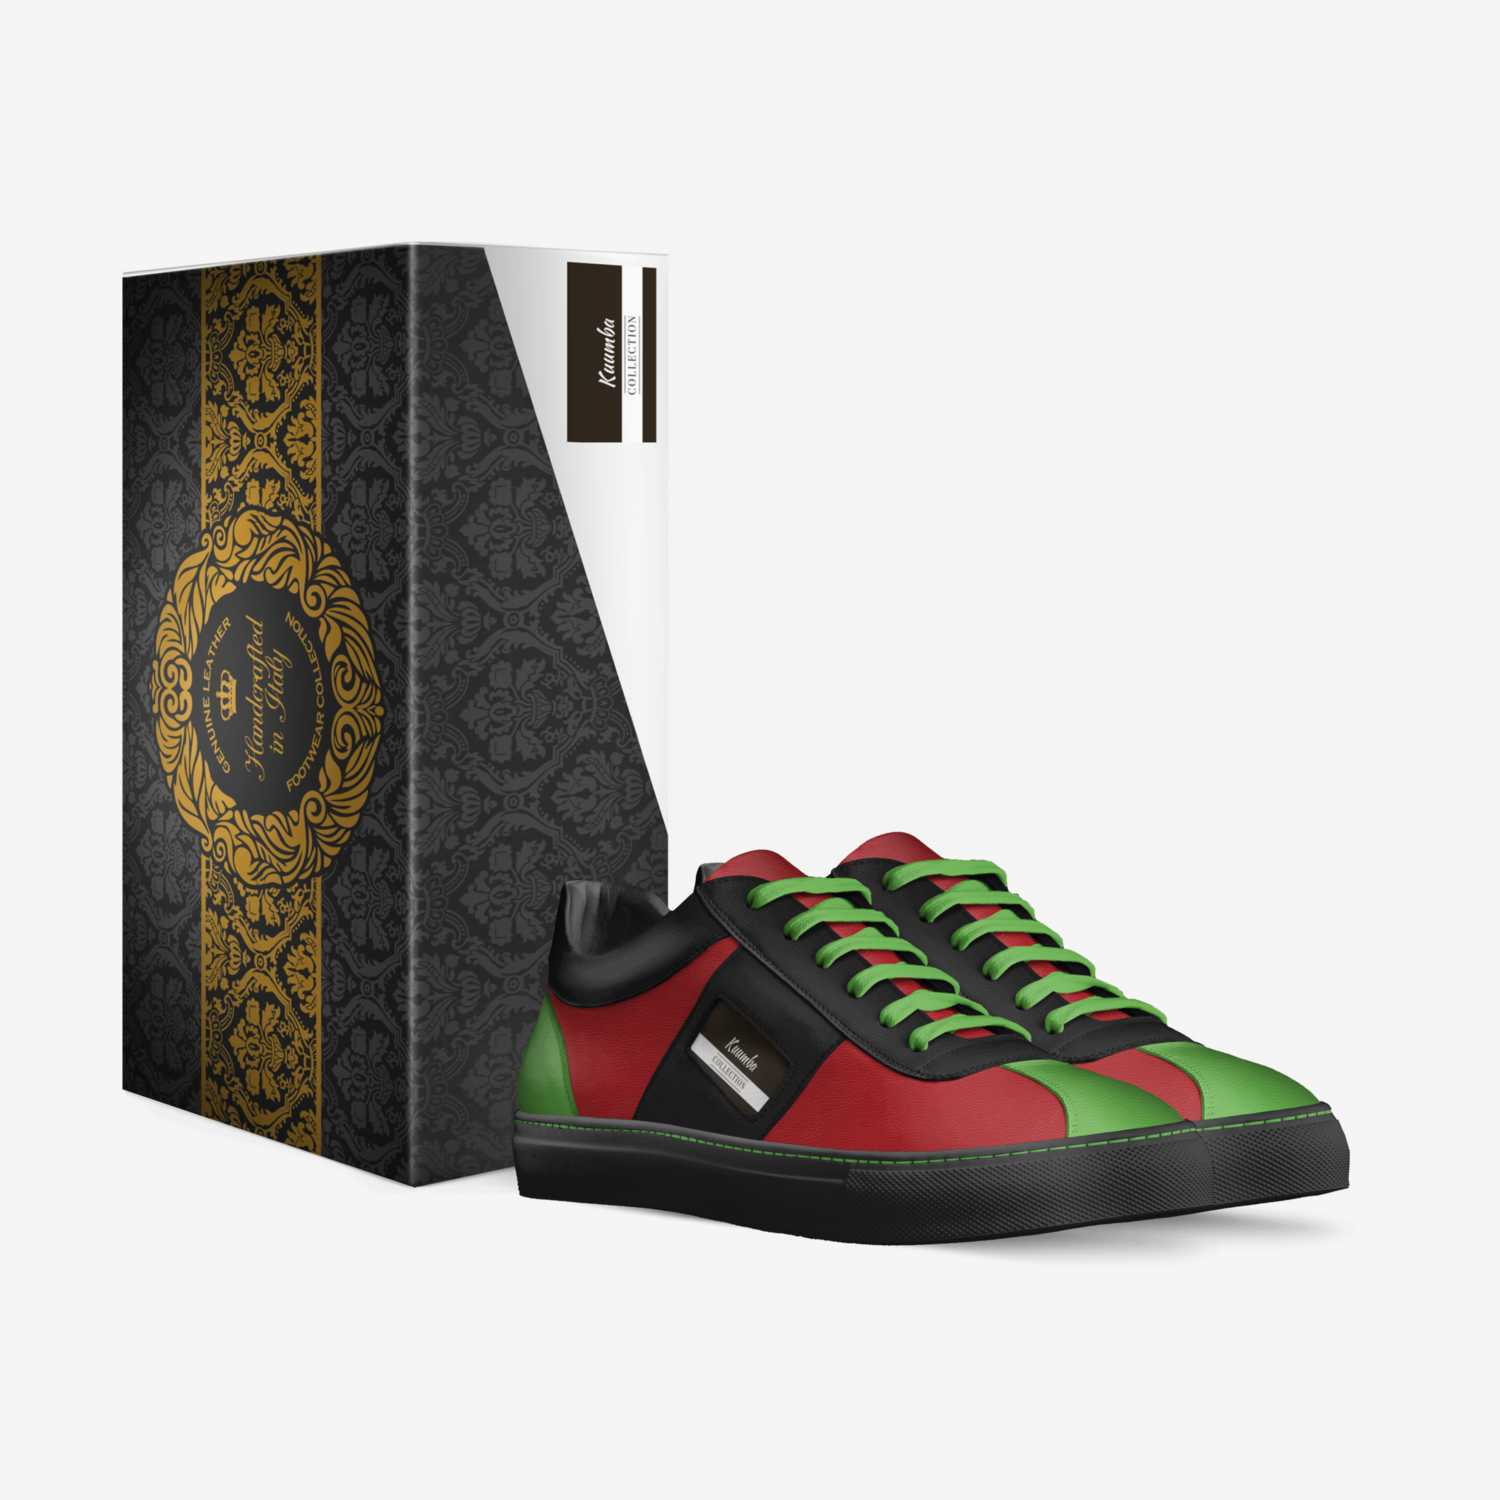 Kuumba custom made in Italy shoes by Chris Tyrell | Box view